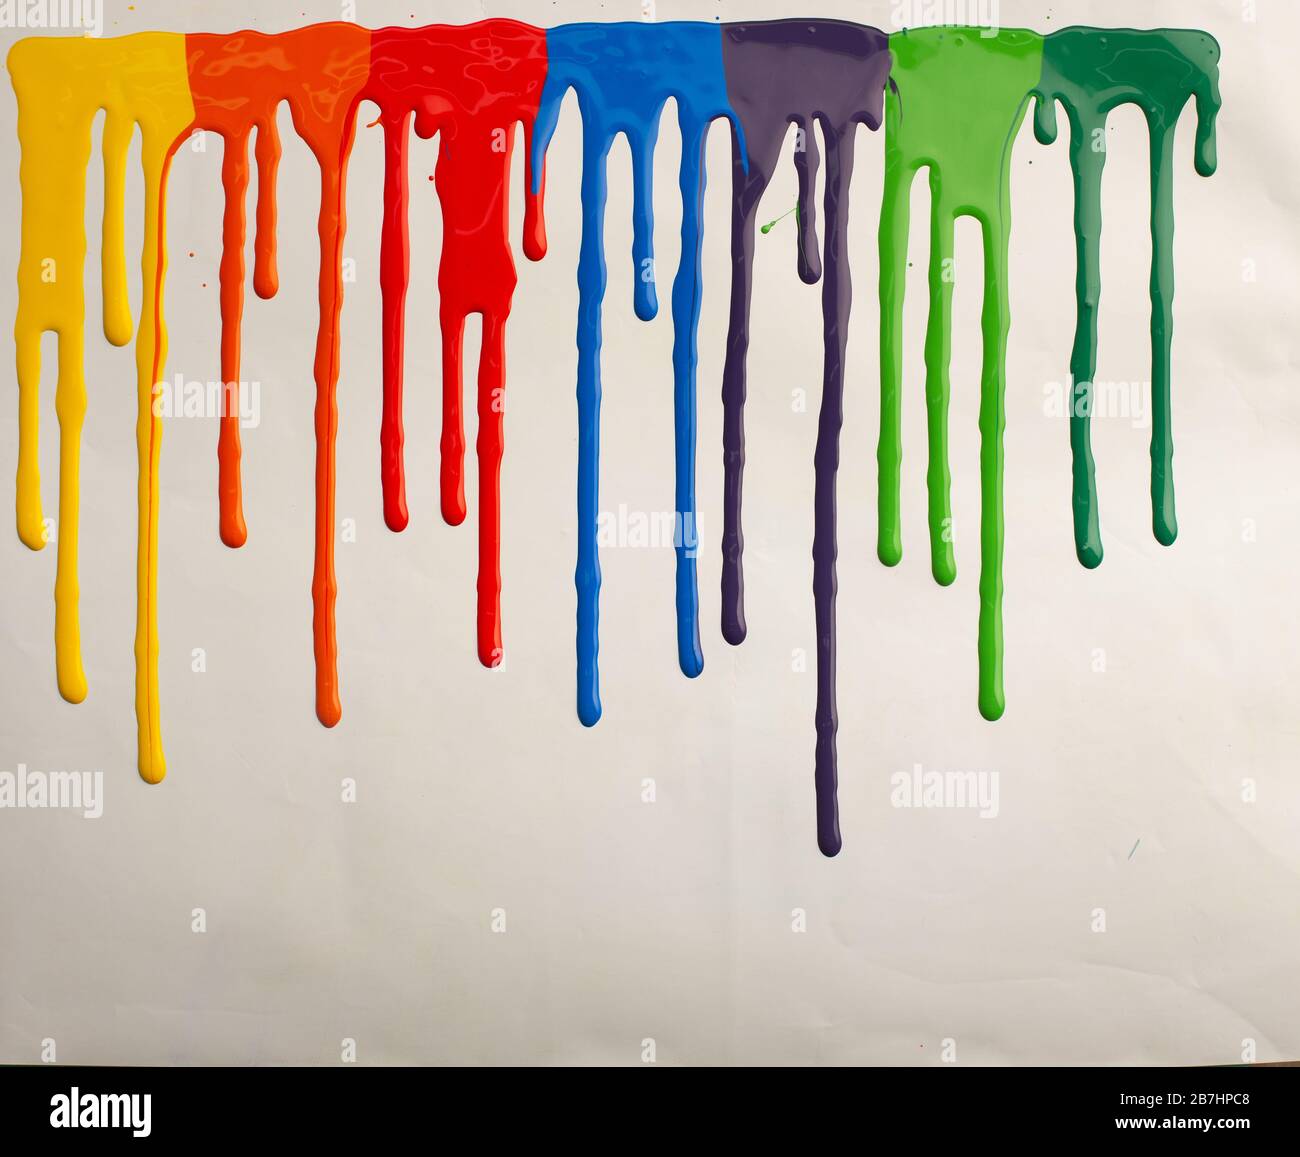 Advertisement of paint colors, colorful acrylic paint dripping Stock Photo